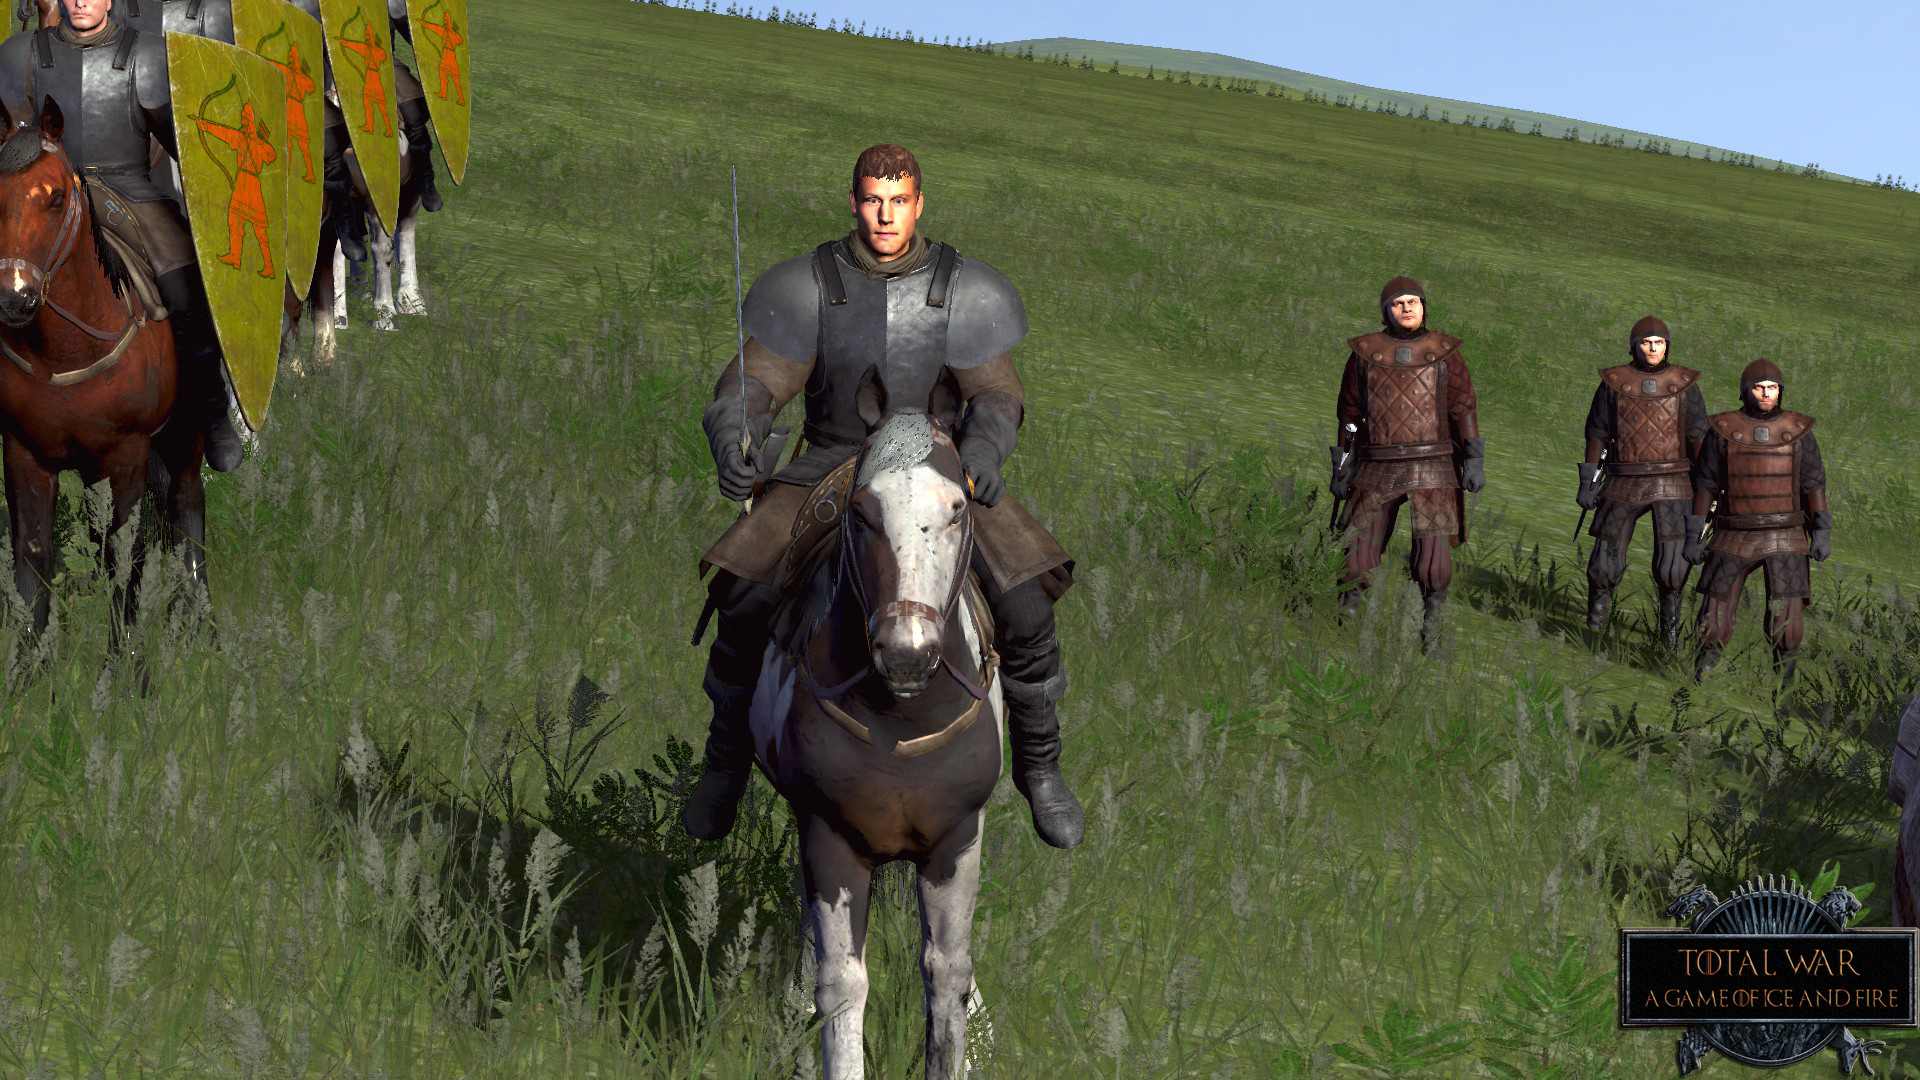 House Tarly Image Total War A Game Of Ice And Fire Mod For Total War Attila Moddb